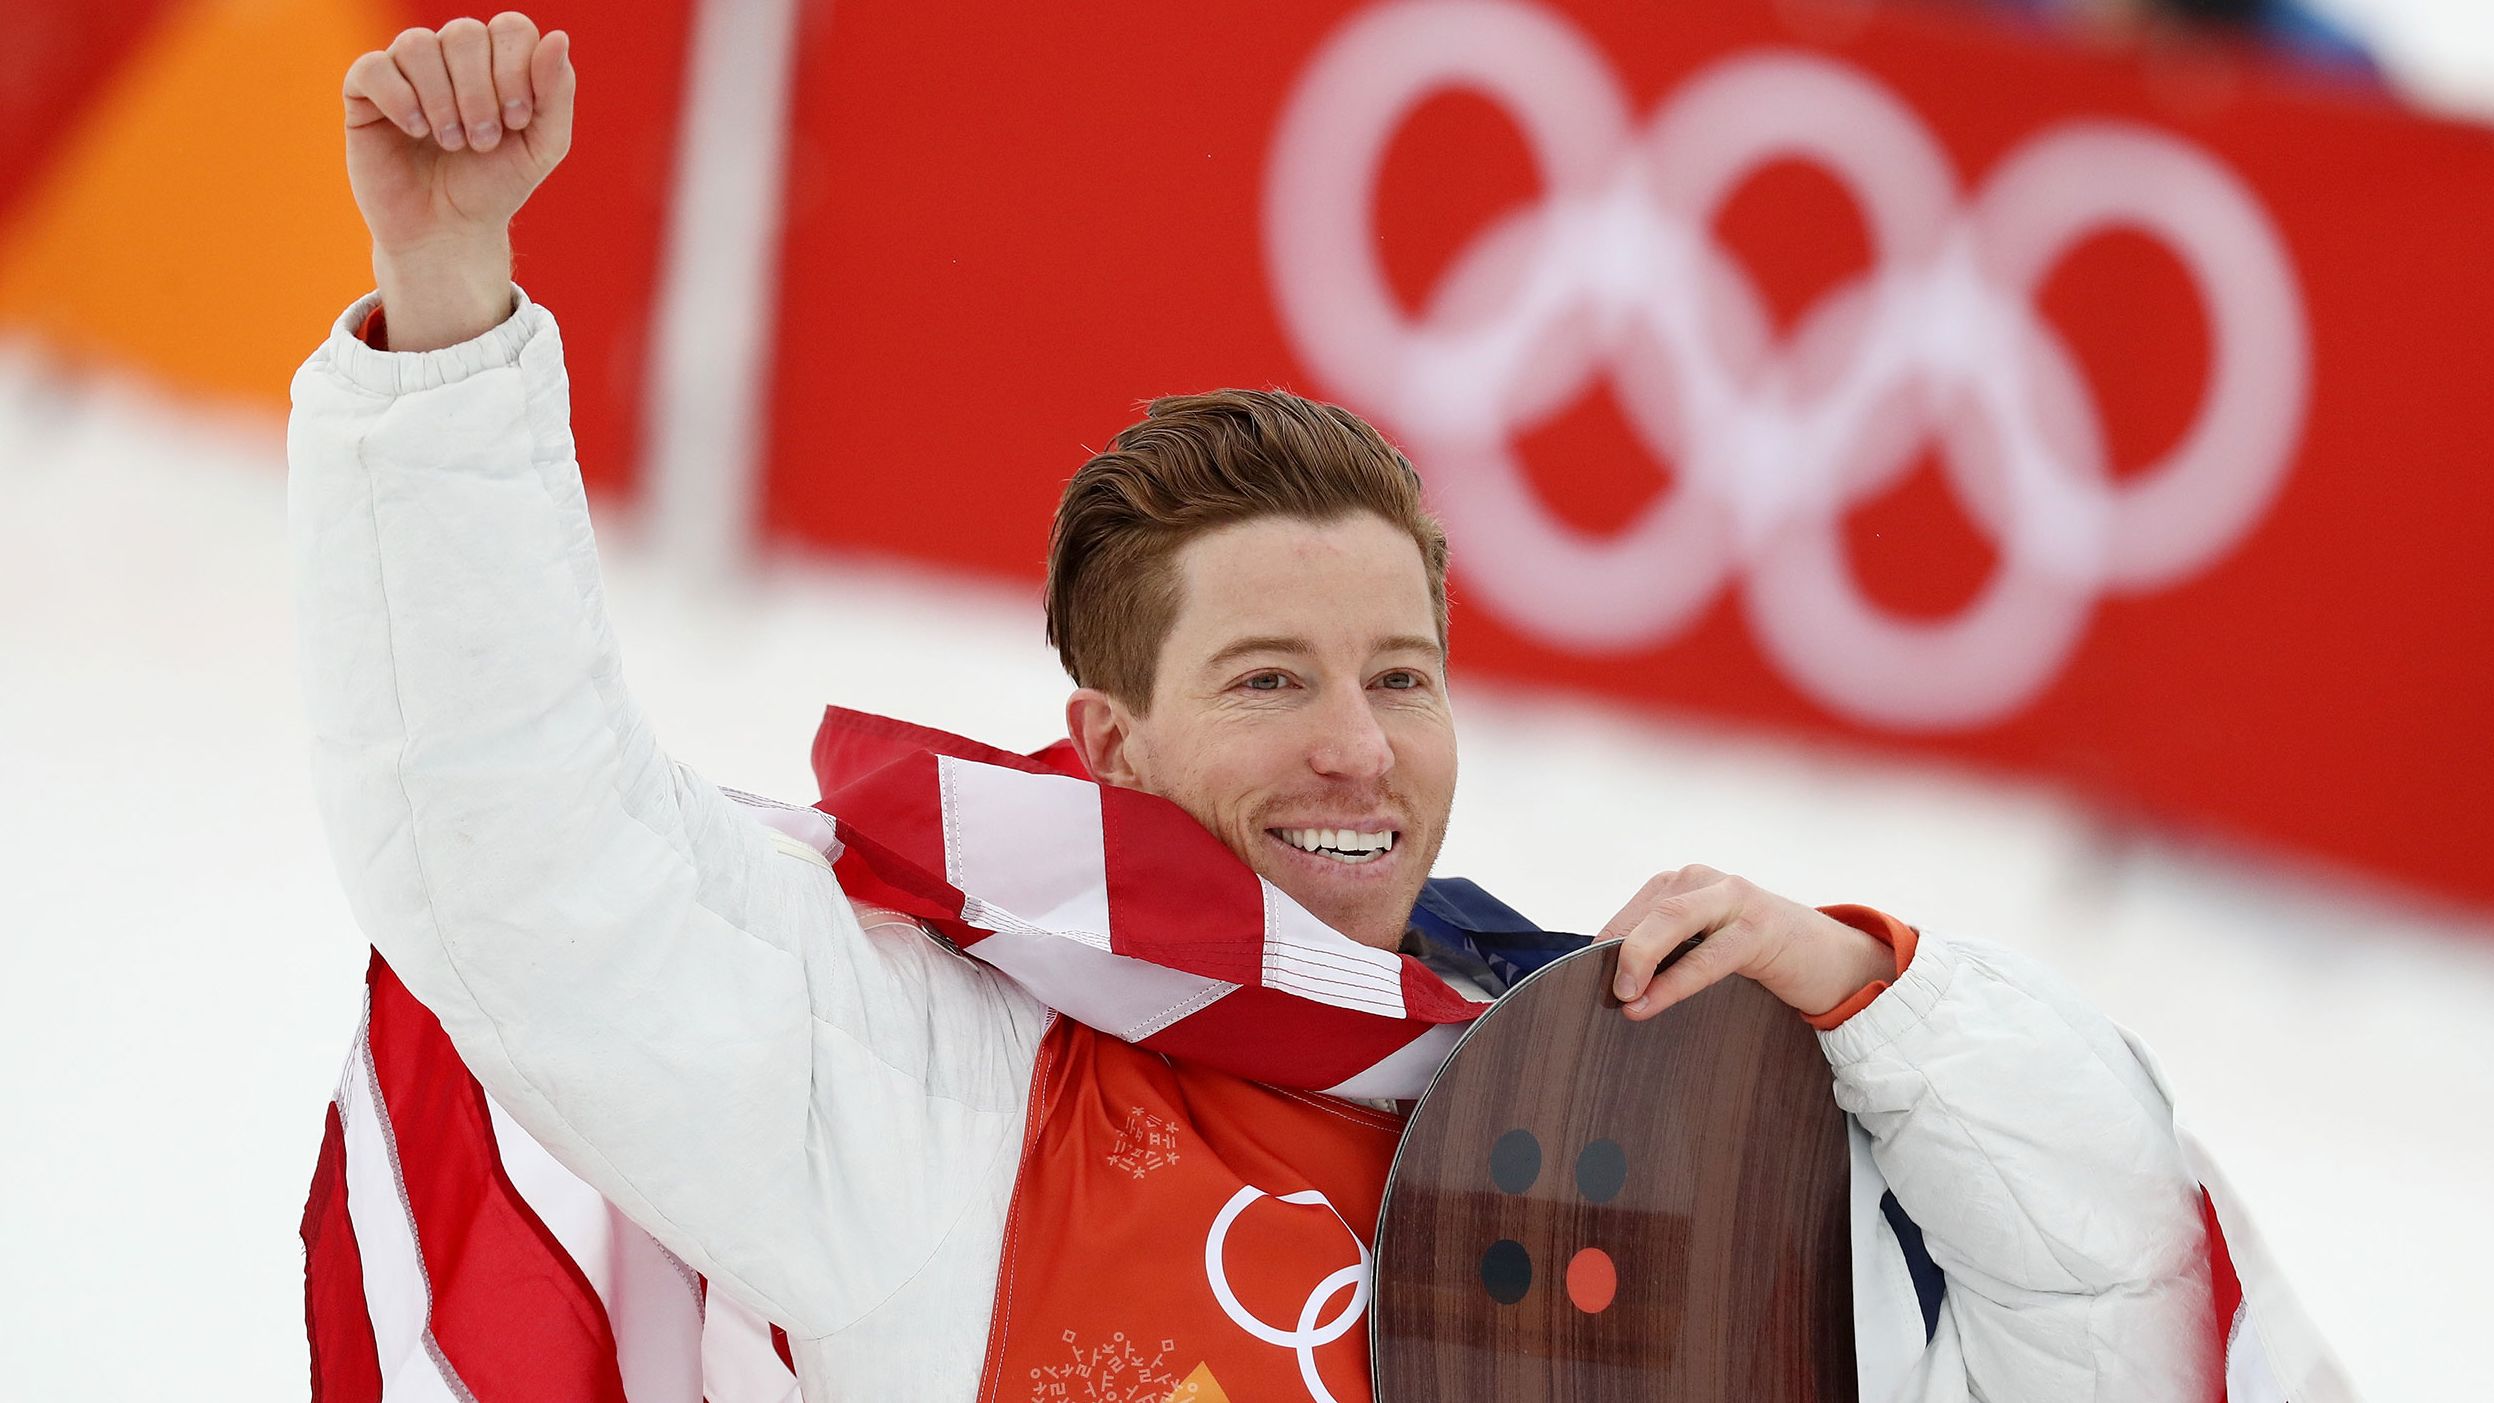 <strong>Shaun White (United States):</strong> White has been the face of snowboarding since 2006, when he won gold in his Olympic debut and was known as the "flying tomato" because of his flowing red hair. He has won gold in the halfpipe event three times, and his most recent win in 2018 prompted <a href="https://www.cnn.com/2018/02/14/sport/cnn-photos-shaun-white-gold-medal-moment/index.html" target="_blank">an emotional celebration.</a> At 35, this is likely to be his last Olympics, and he will be looking to go out on top. But he'll face stiff competition from a talented field that includes Japan's Yuto Totsuka, the defending world champion.